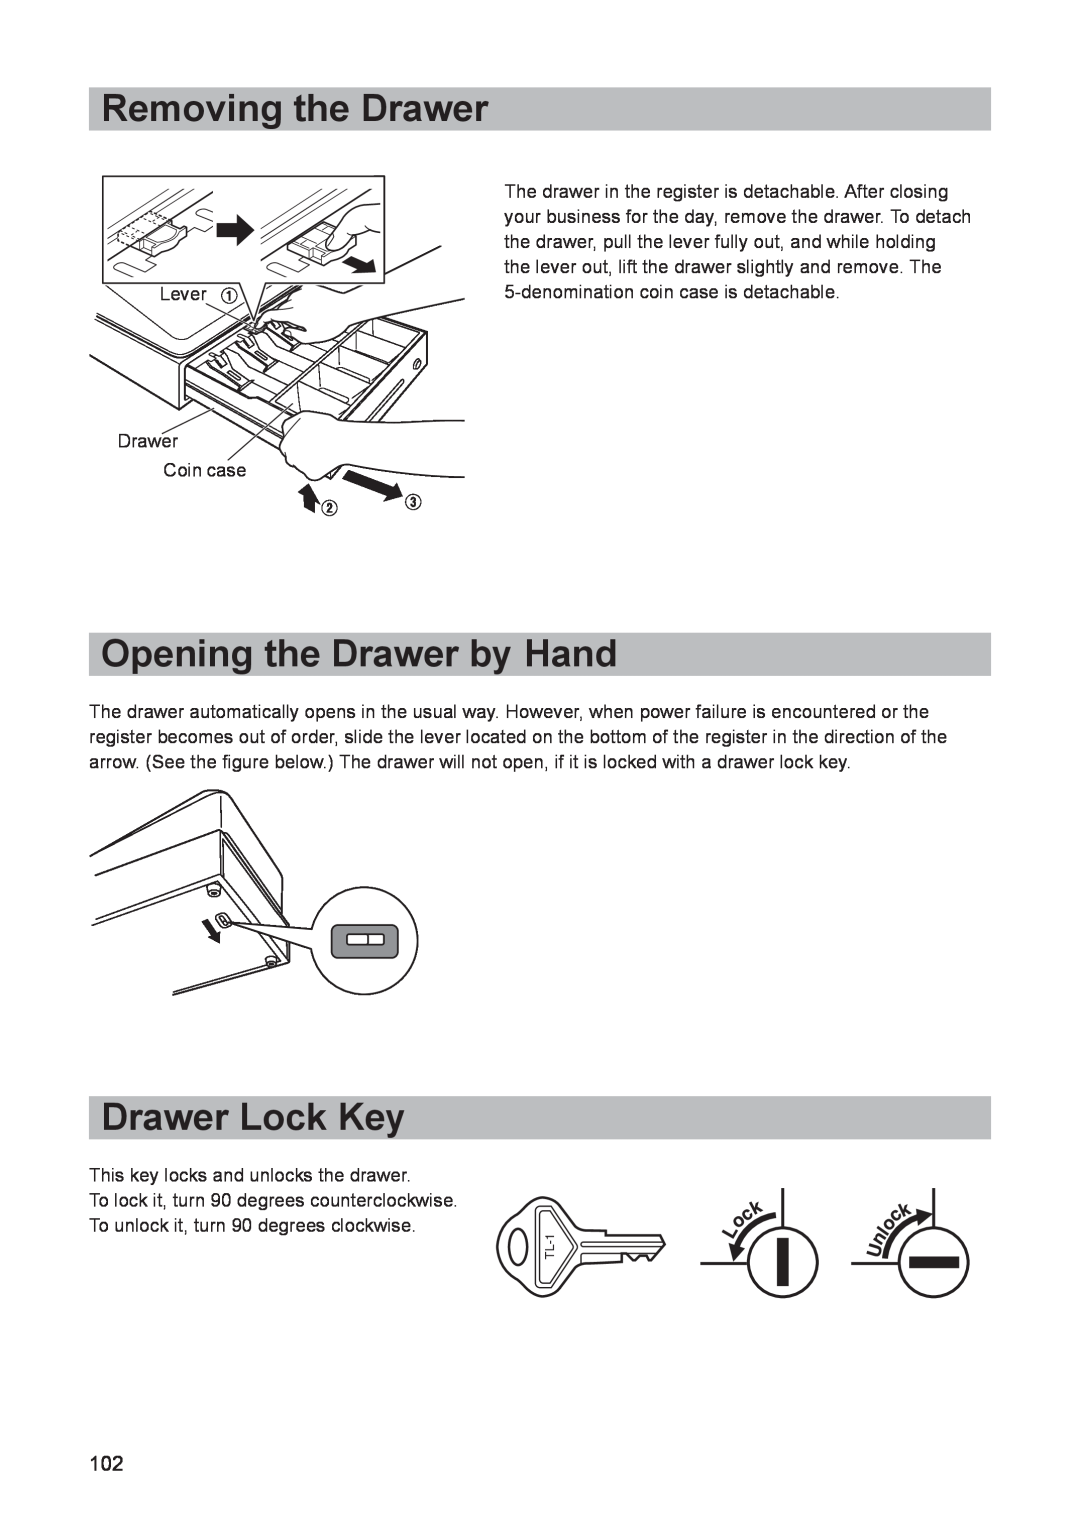 Sharp electonic cash register instruction manual Removing the Drawer, Opening the Drawer by Hand, Drawer Lock Key 